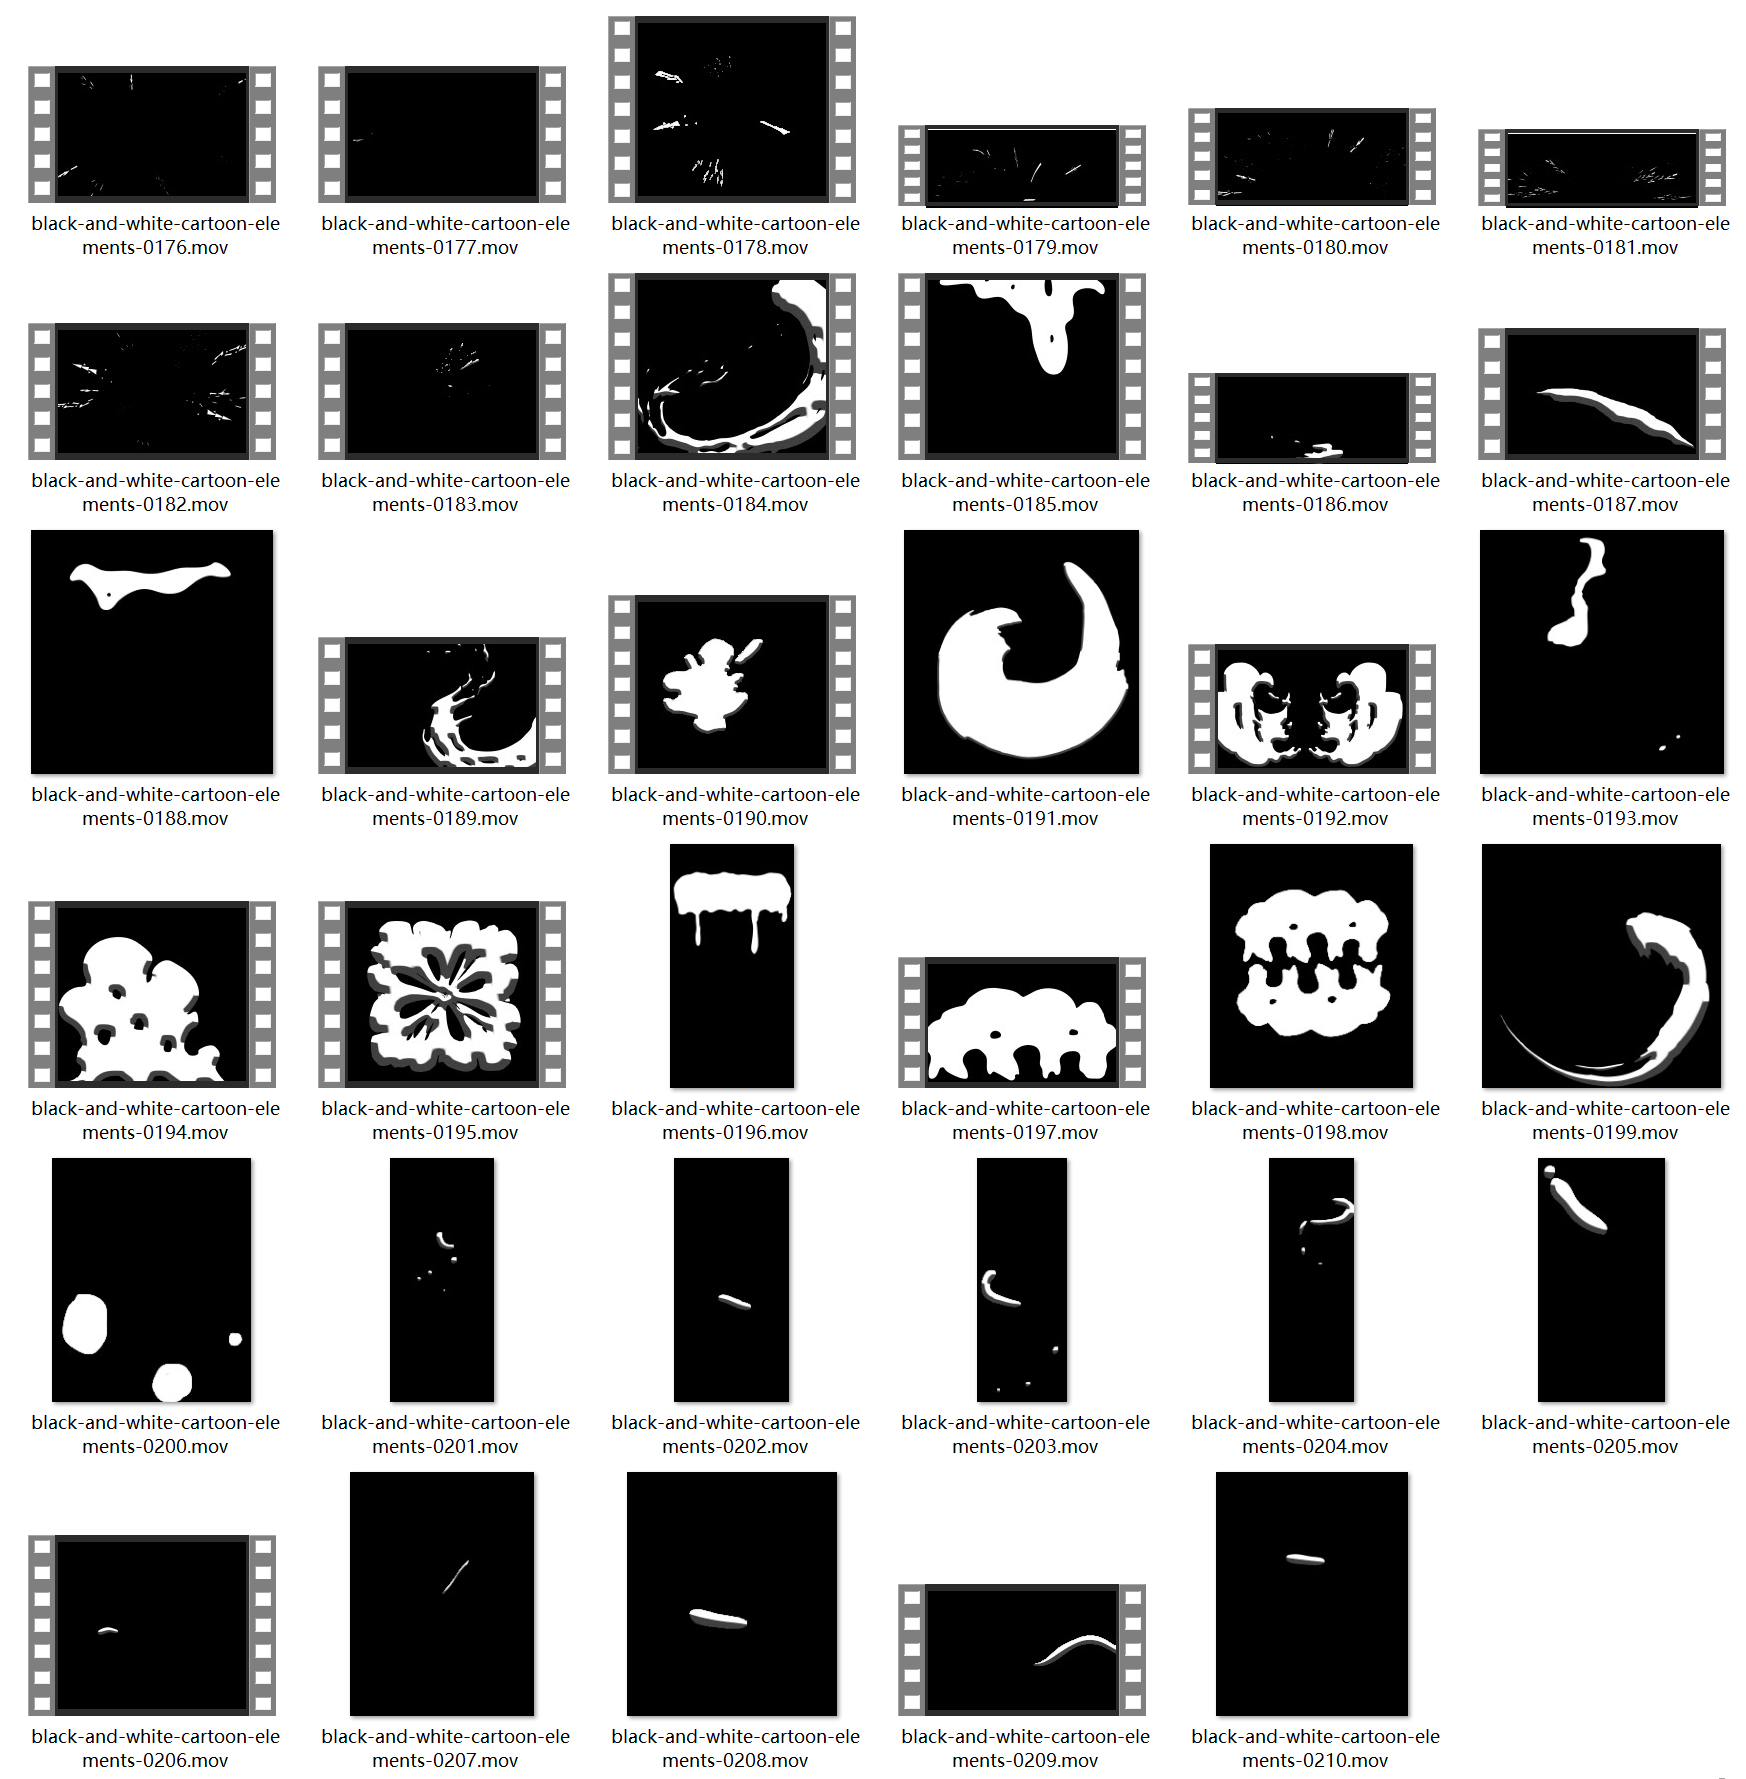 black and white cartoon elements-s0220006a1